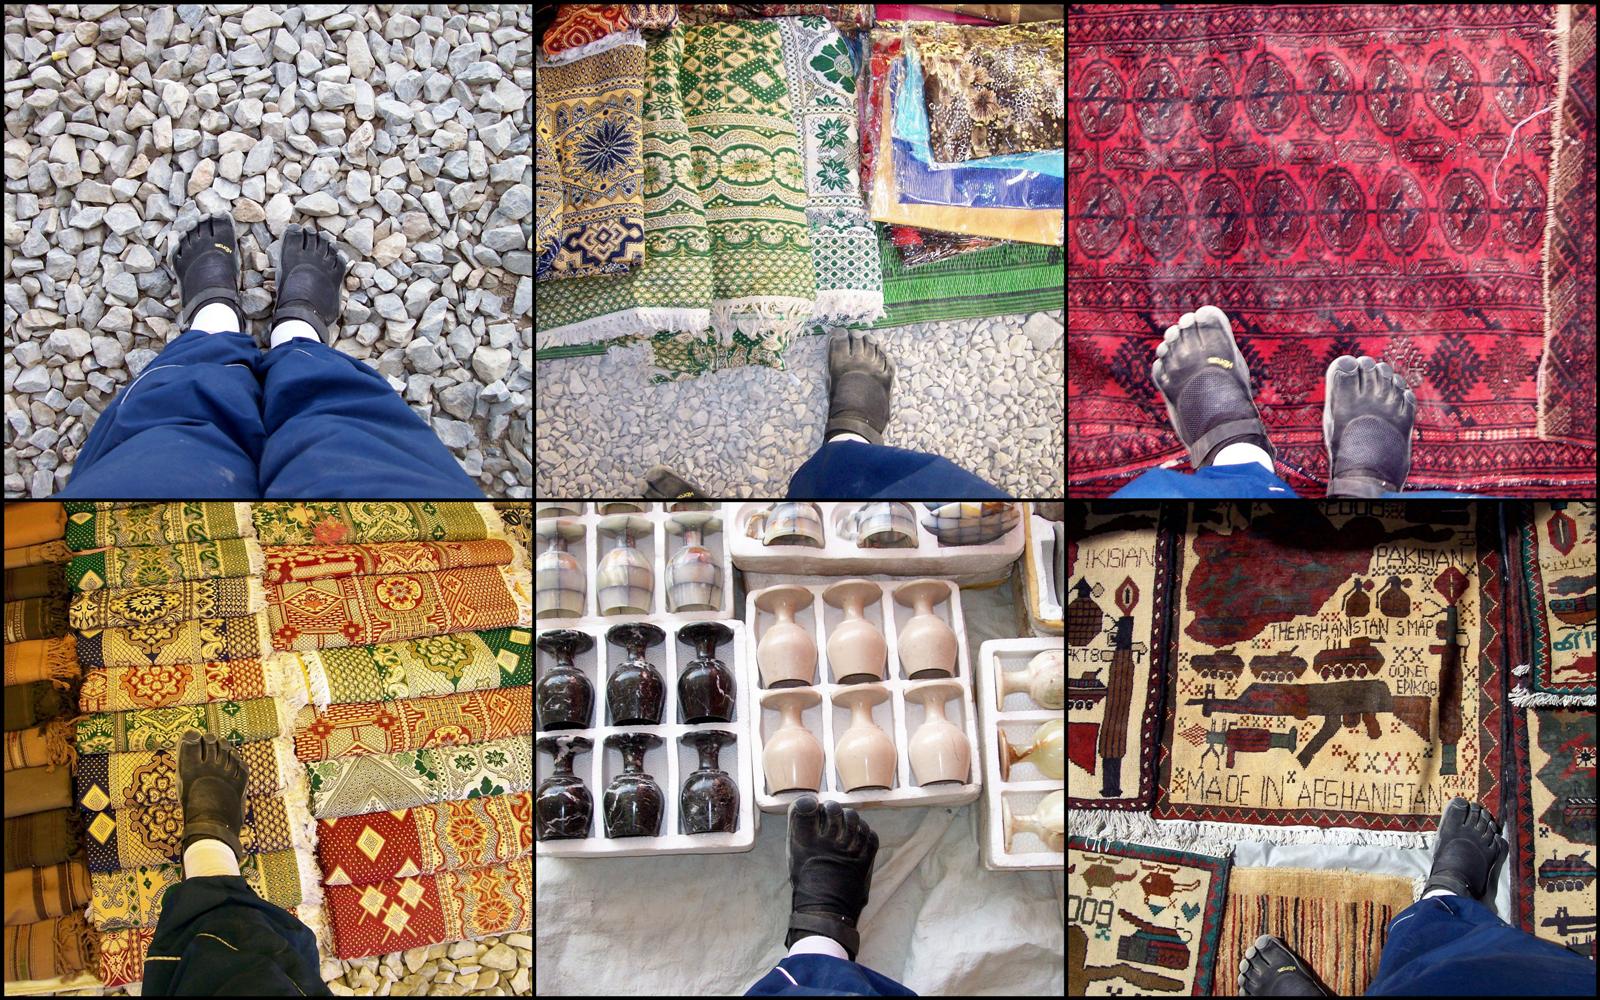 Above are John's black KSOed feet photoed as he strolled about an Afghanistan bazaar in his fivefingers.